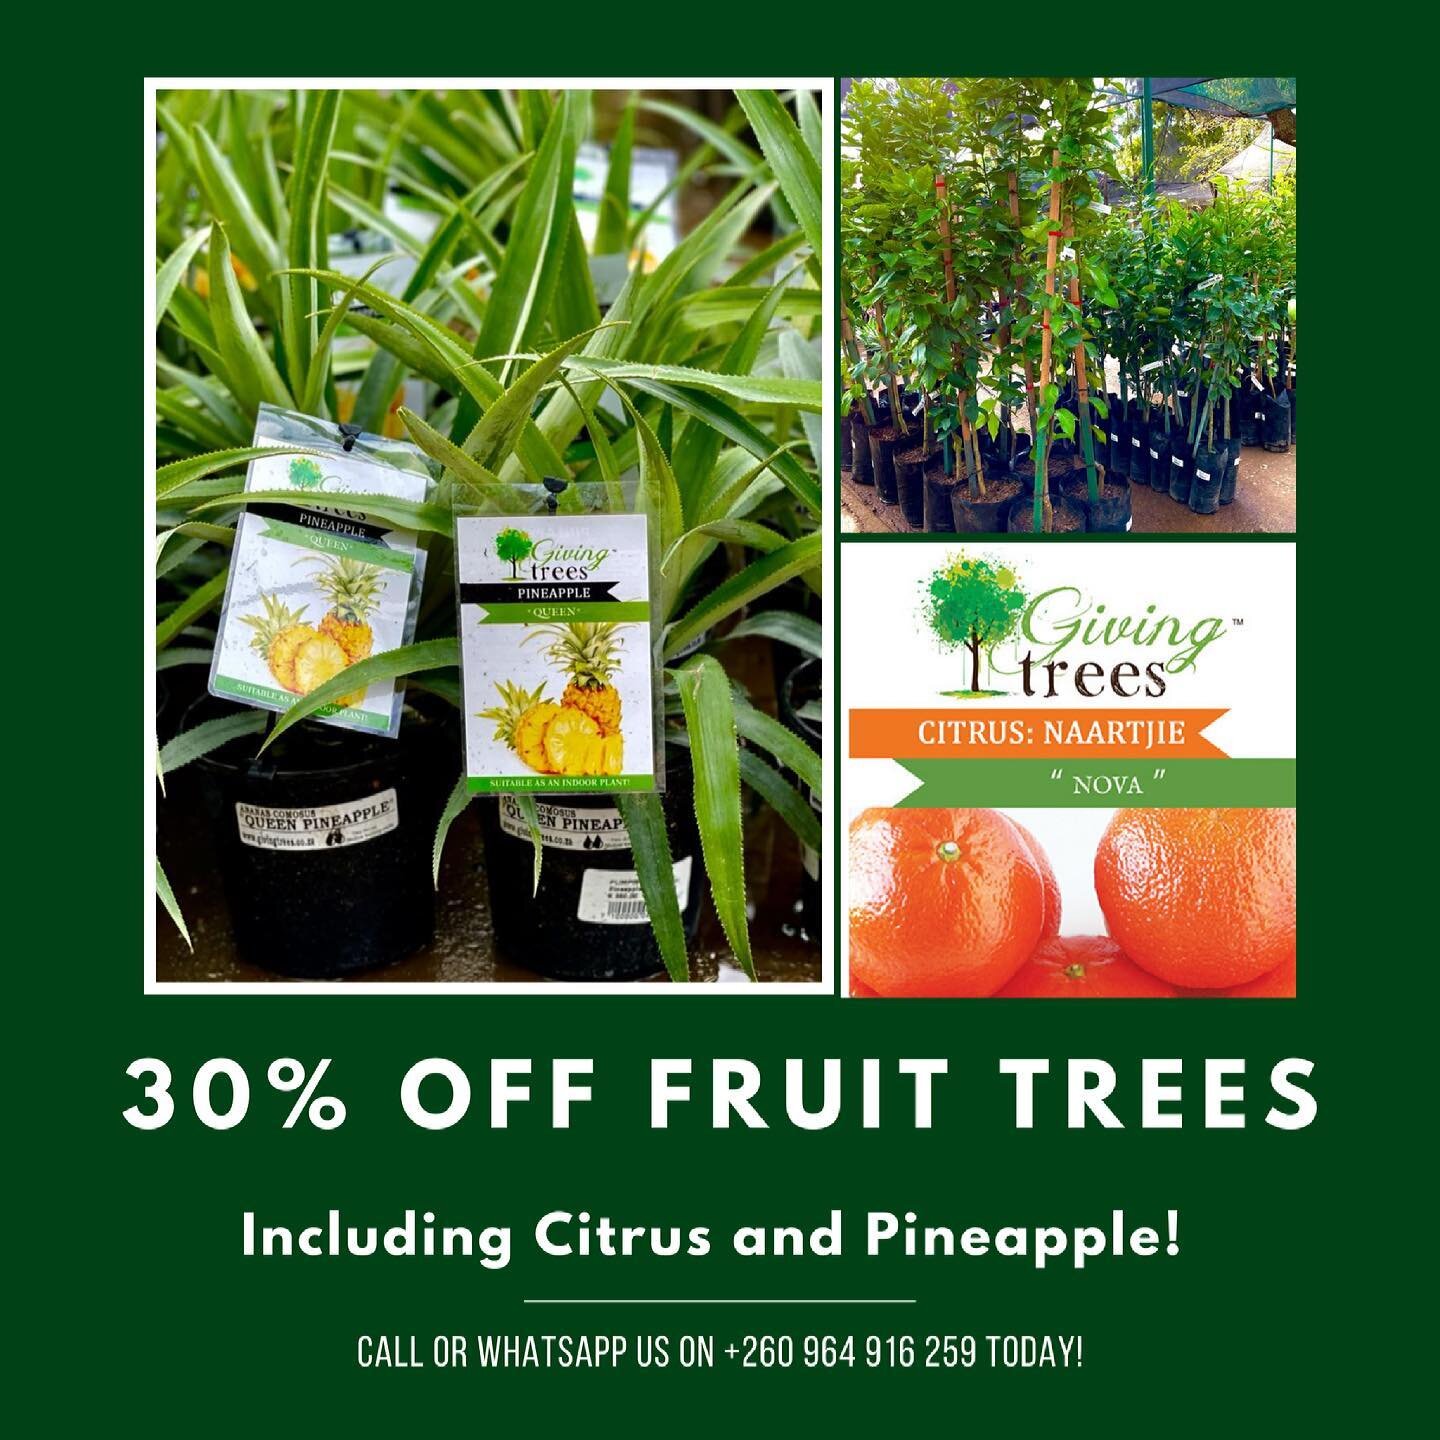 New in Citrus and Pineapple! 🍍🍊 includes citrus such as naartjie nova and lemons too! Also 30% off right now with our limited time fruit tree offer! Call/WhatsApp +260 96 4916259 for prices